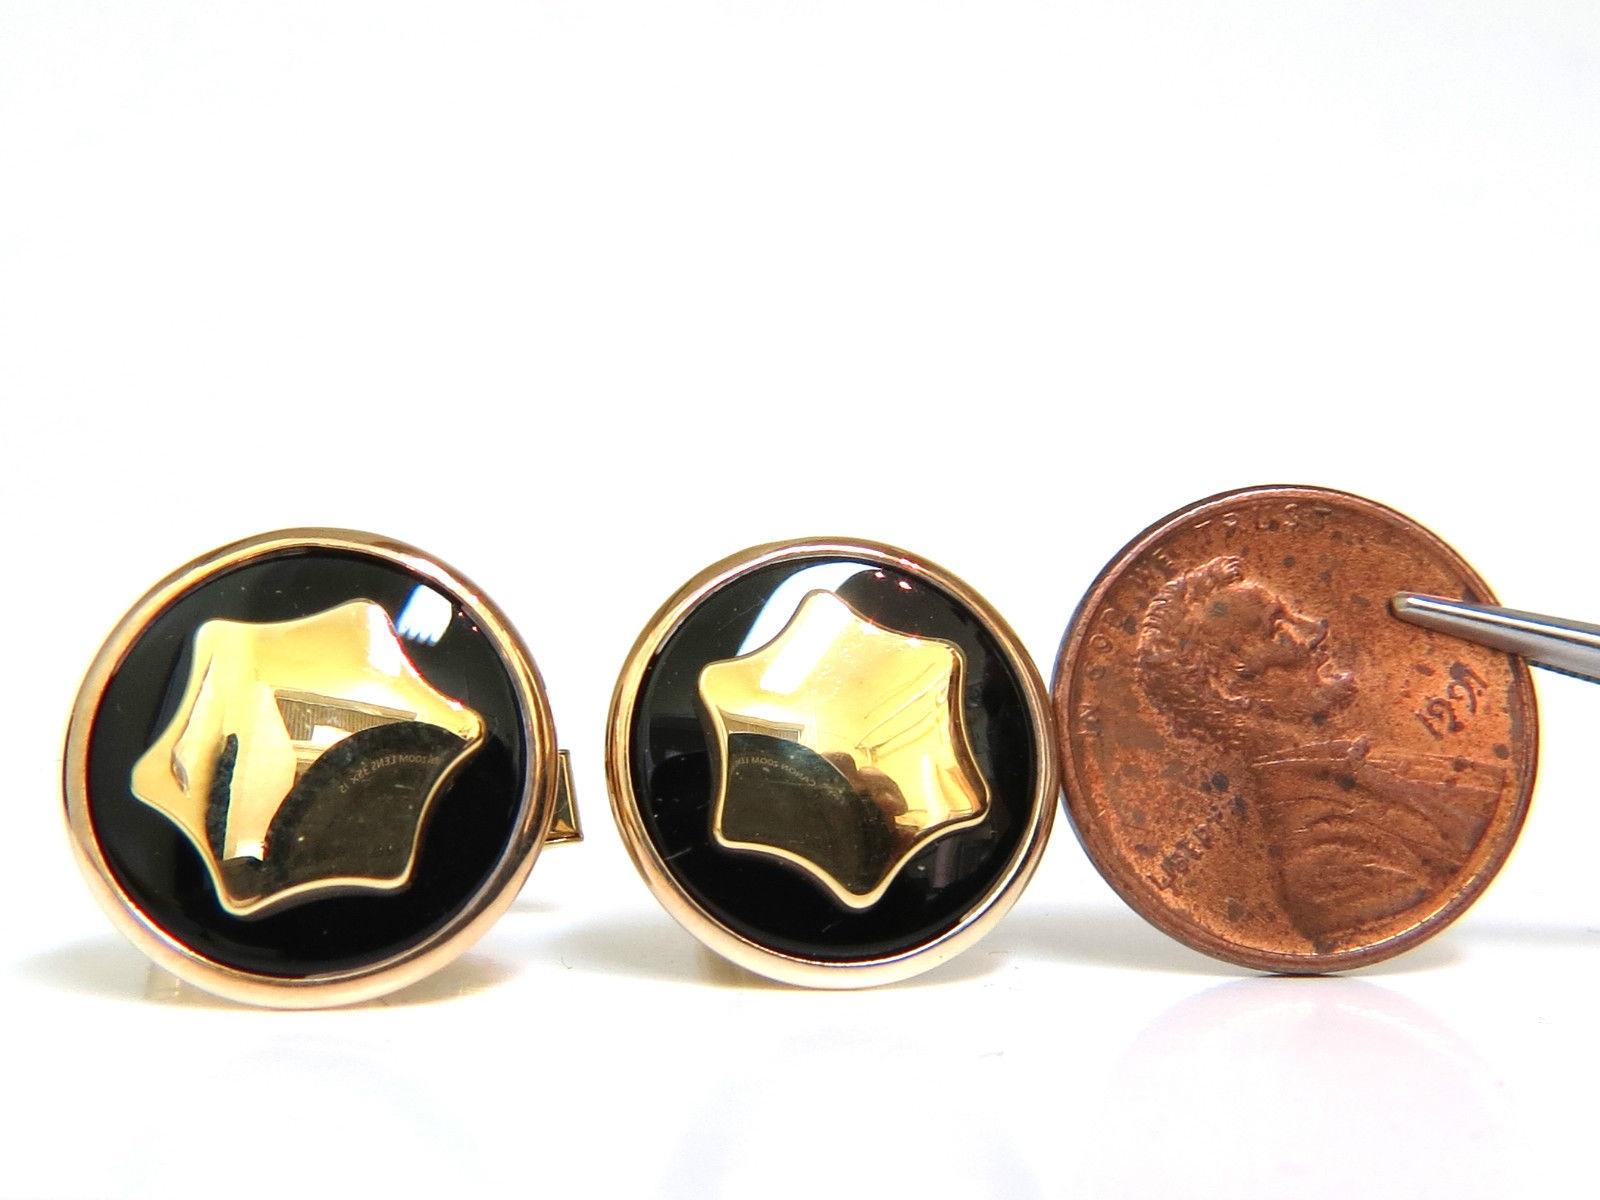 Amazing detail / hand crafted

Natural Black onyx

with modified star of david on top.

star of daivid, is raised up so it was compiled of 3 pieces in total.

black onyx, the outer gold rim and the star of david on top.

Gorgeous detail.

Can be